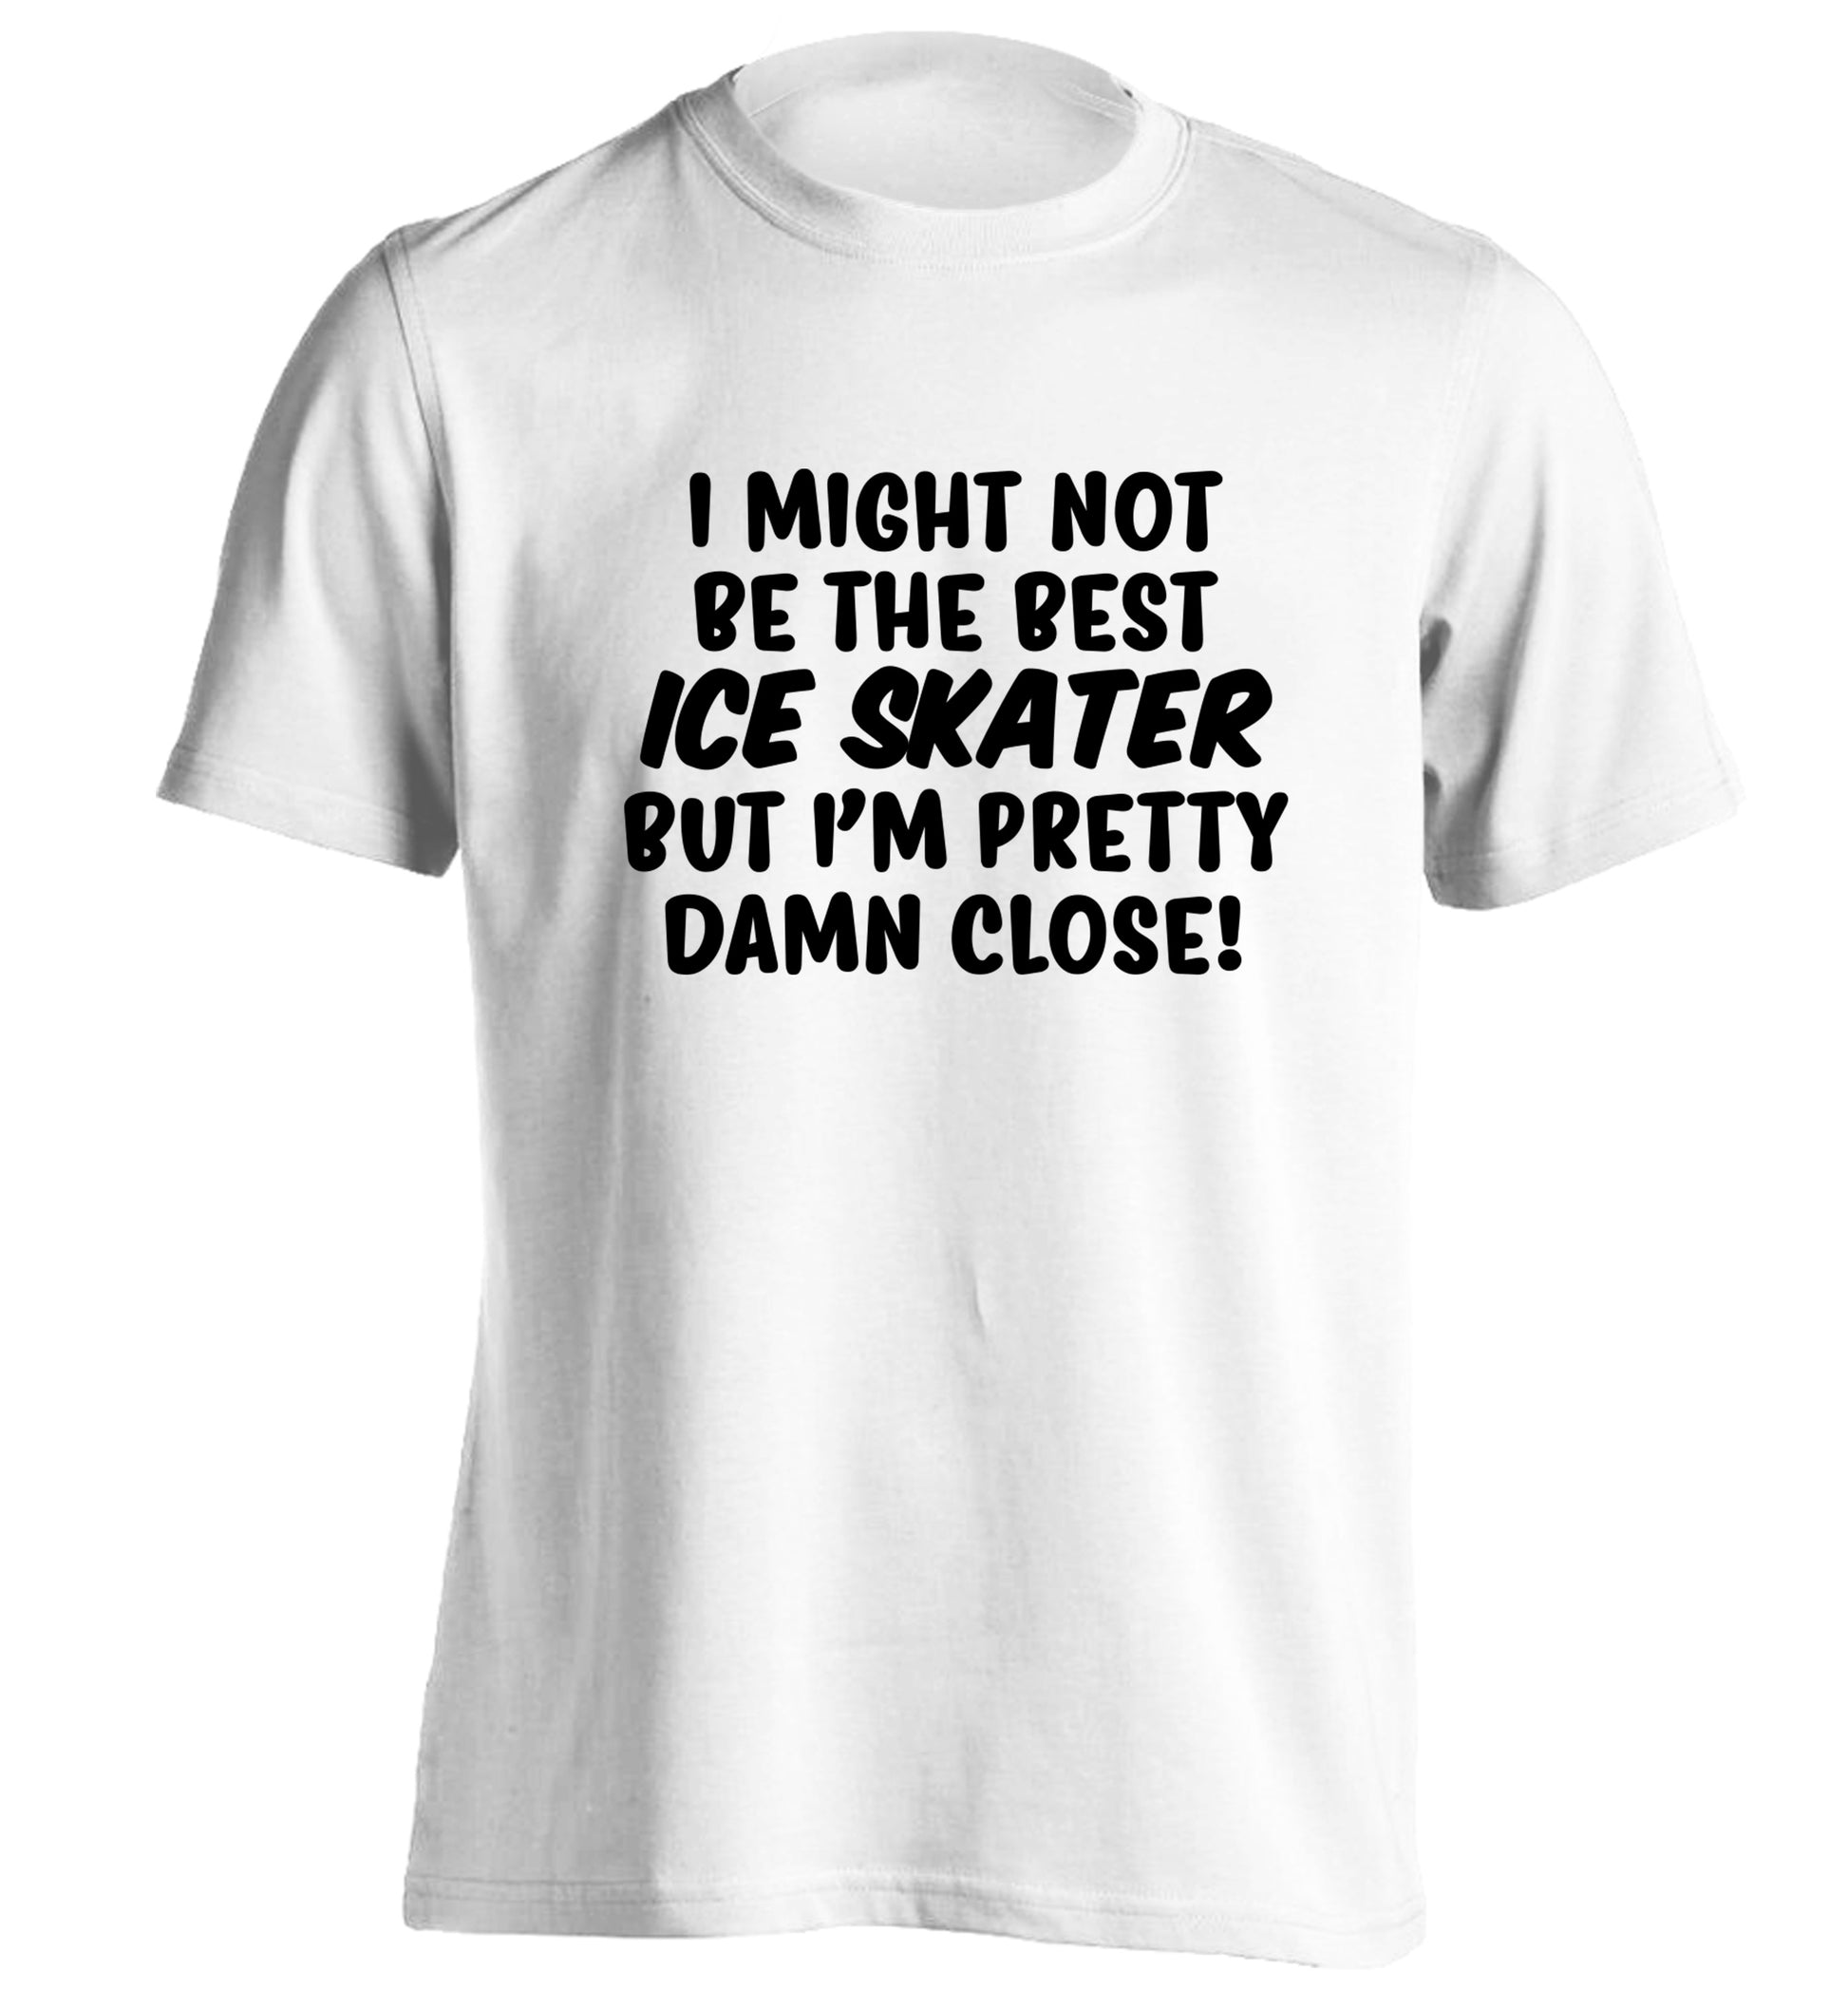 I might not be the best ice skater but I'm pretty damn close! adults unisexwhite Tshirt 2XL